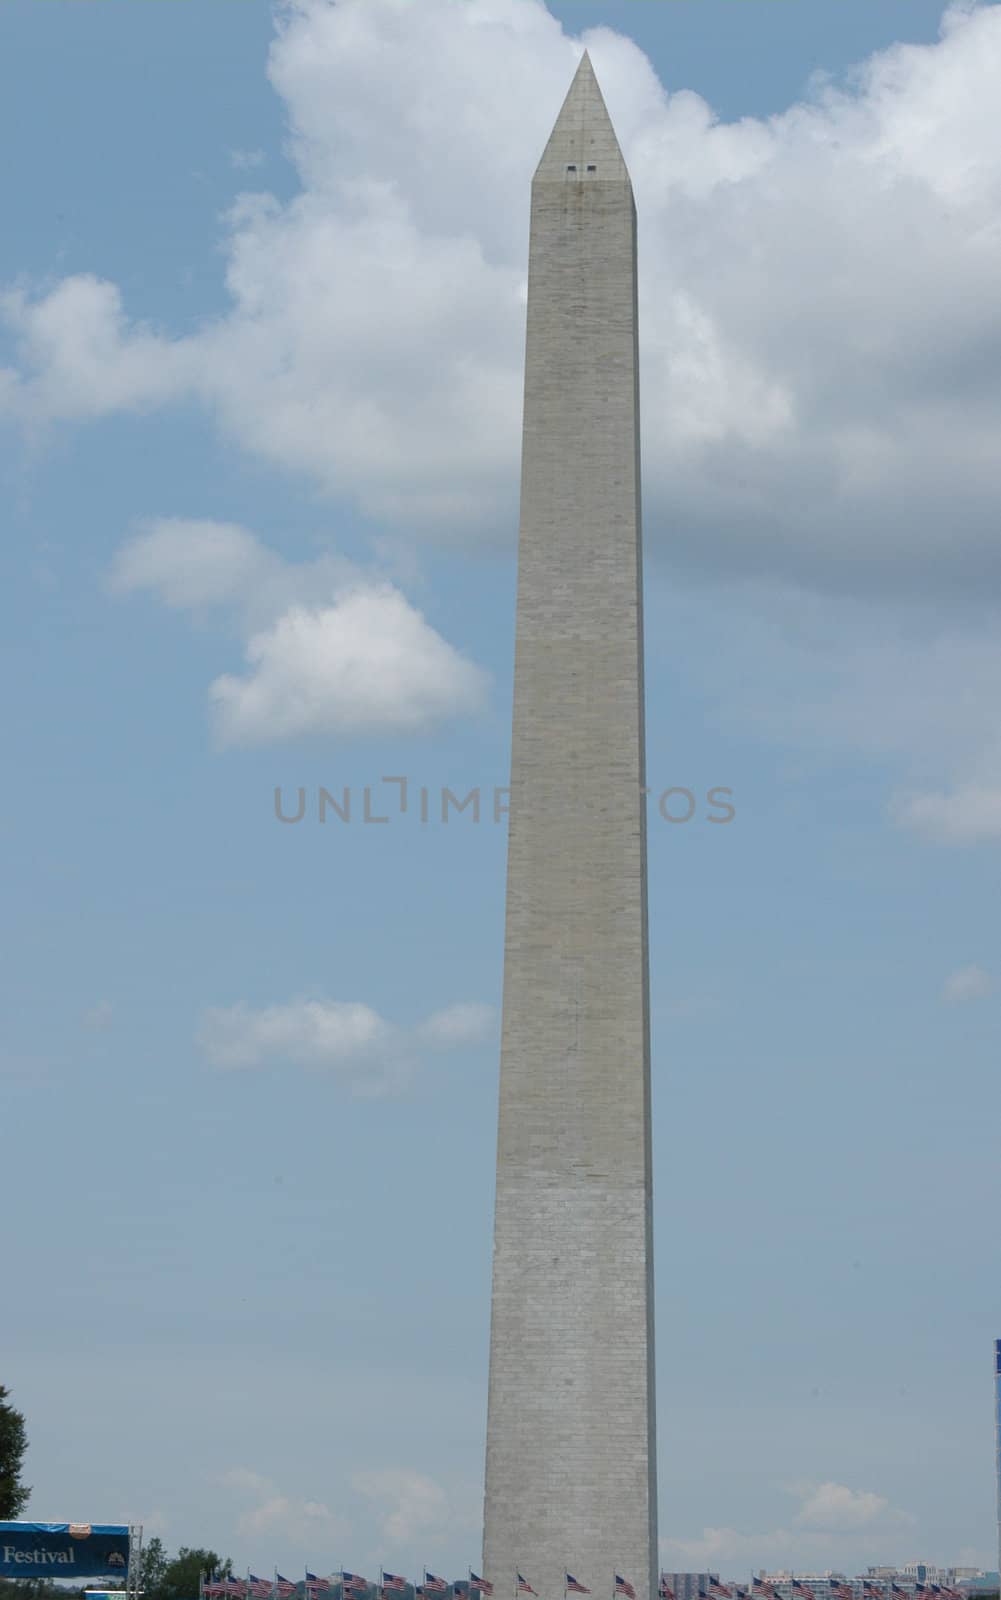 A view of the Washington Monument in the USA capitol